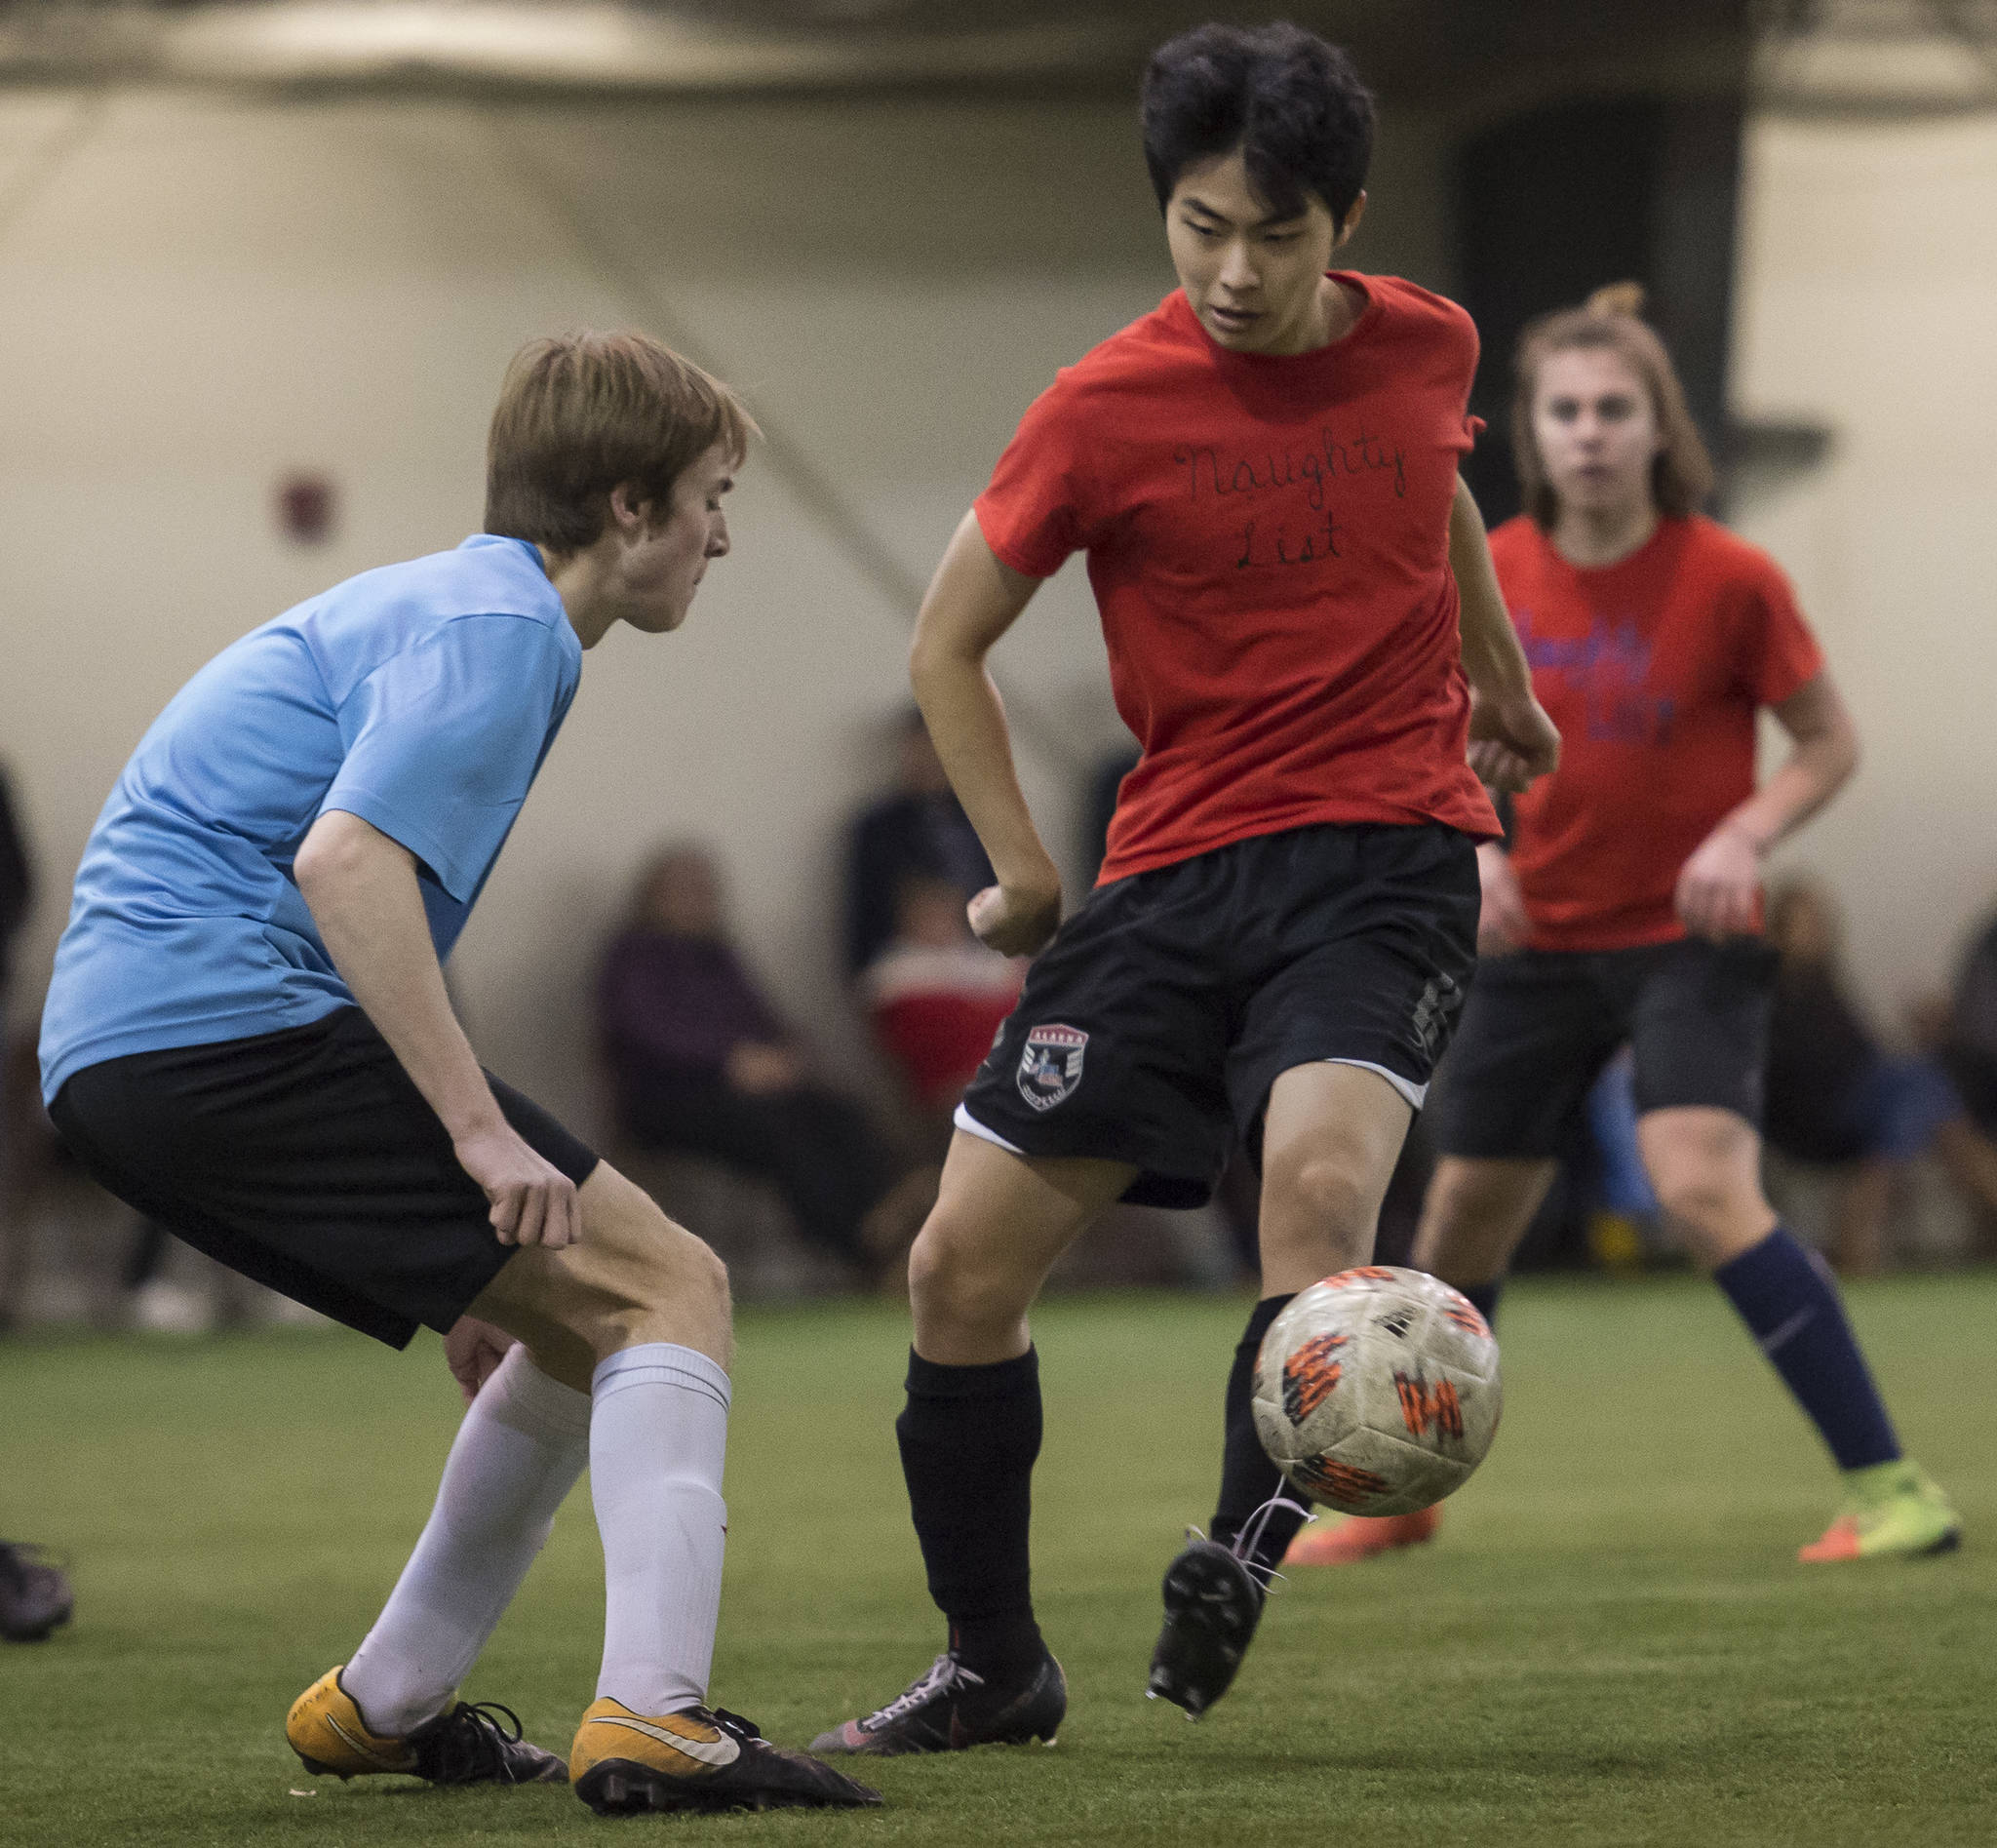 Iced Out, blue, competes against Naughty List, red, in the finals of the high school division at the annual Holiday Cup Soccer Tournament at the Wells Fargo Dimond Park Field House on Monday, Dec. 31, 2018. Iced Out won 8-2. (Michael Penn | Juneau Empire)